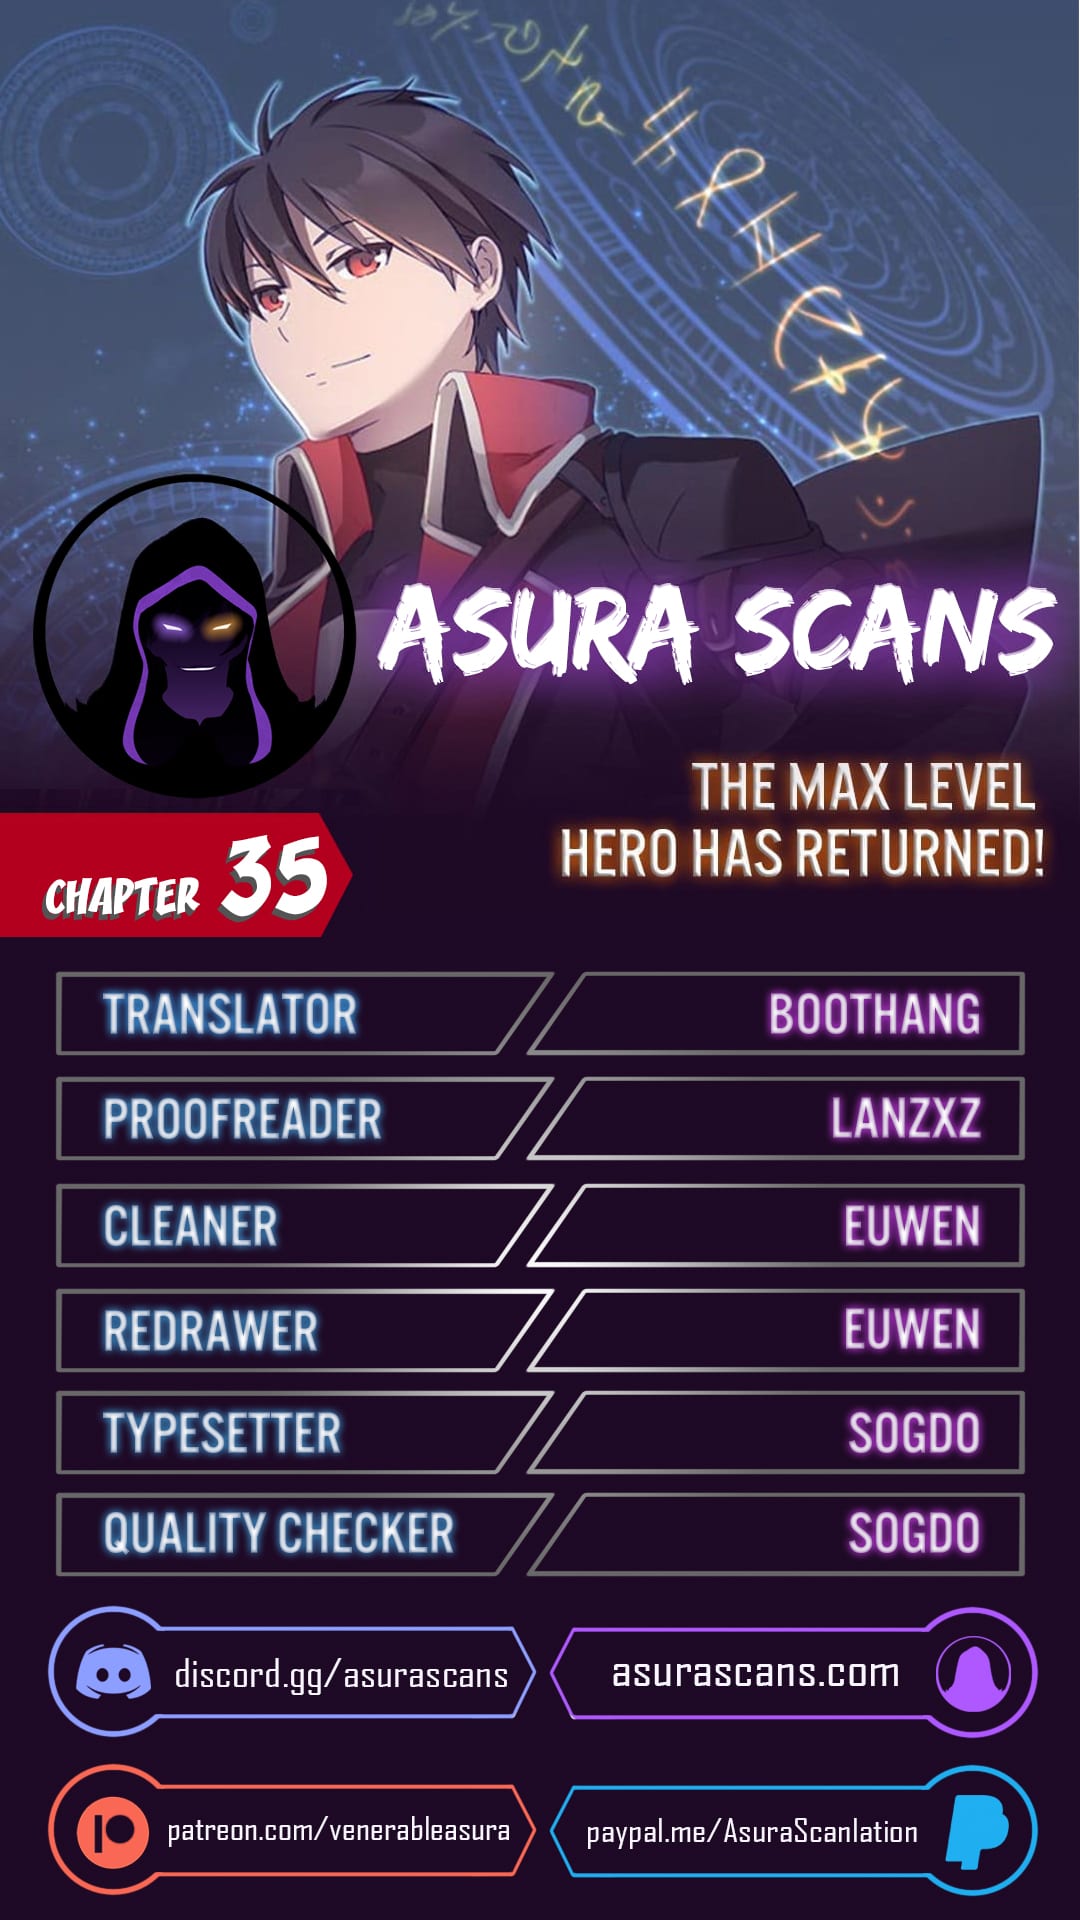 The MAX leveled hero will return! Chapter 35